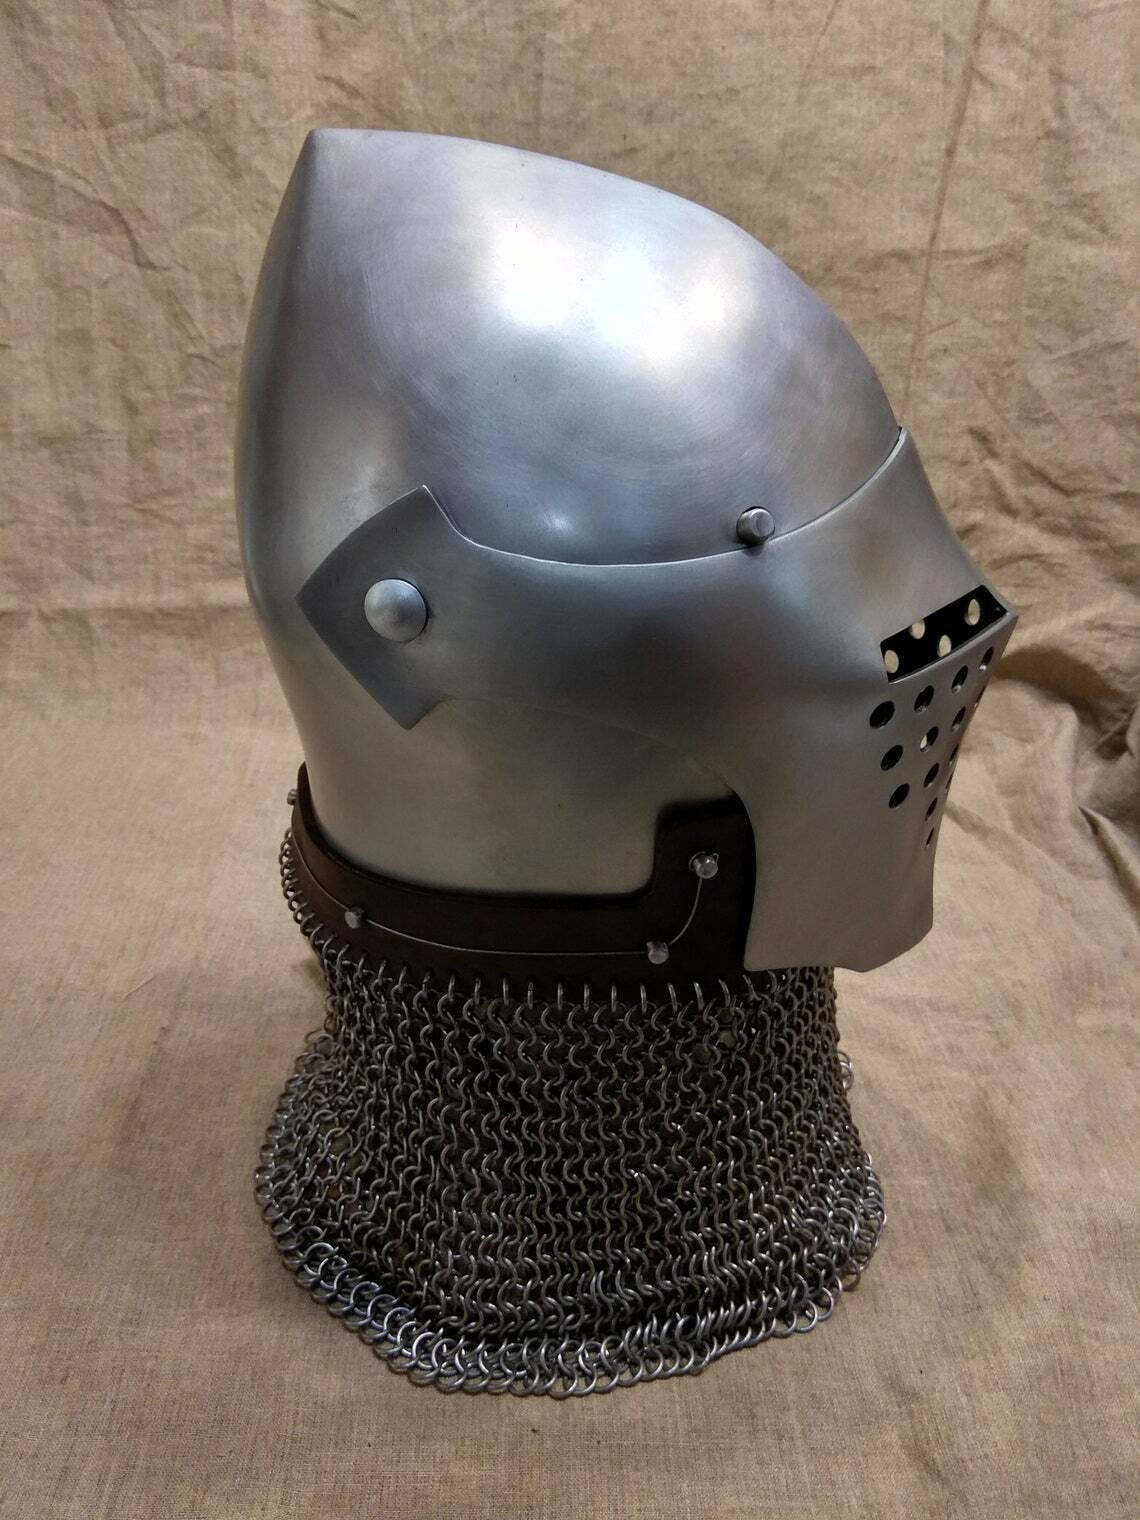 Details about   18GA Steel Medieval Turban Helmet Replica Helmet With Liner And Chain Mail YZ478 